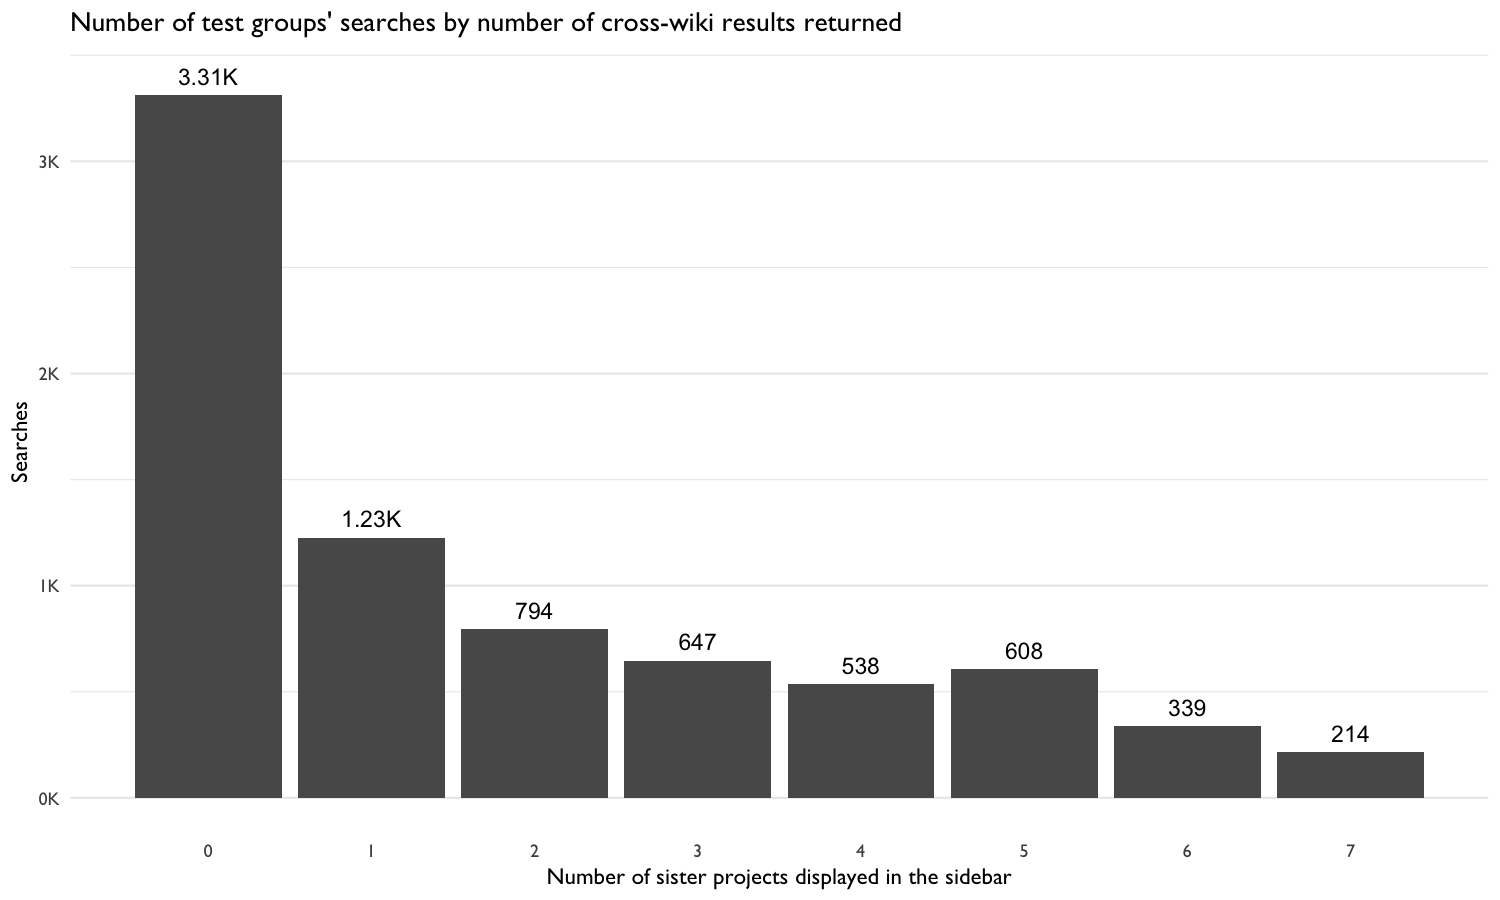 **Figure 9**: How many of the two test groups' searches returned cross-wiki results from 0 (none) - 7 (all) sister projects.